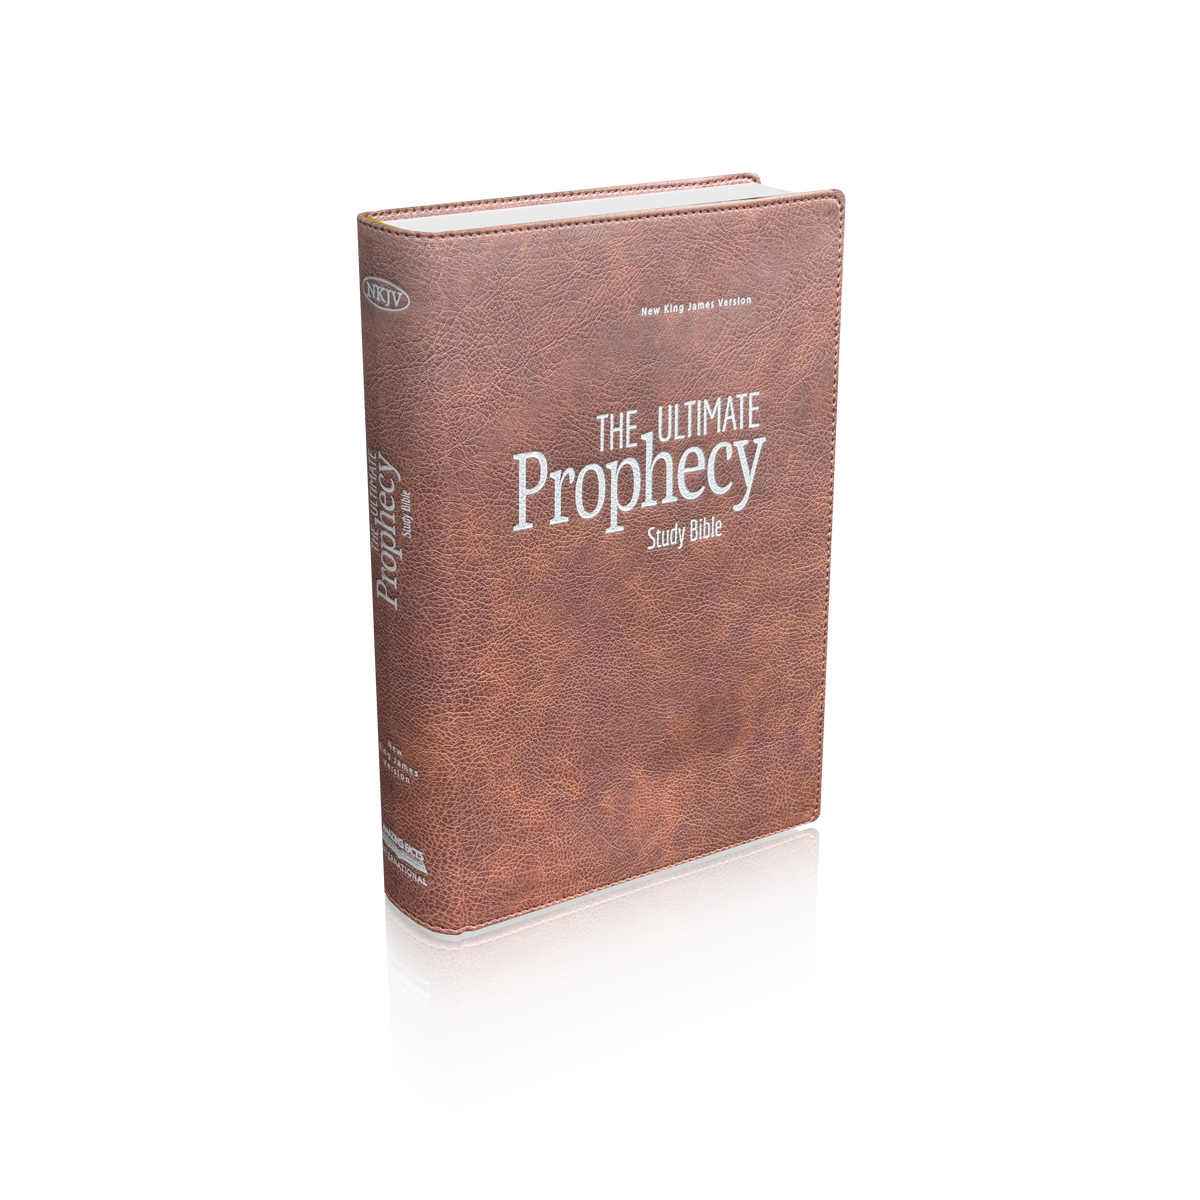 Pre-Order Now! The Ultimate Prophecy Study Bible - Brown Leathersoft by Amazing Facts